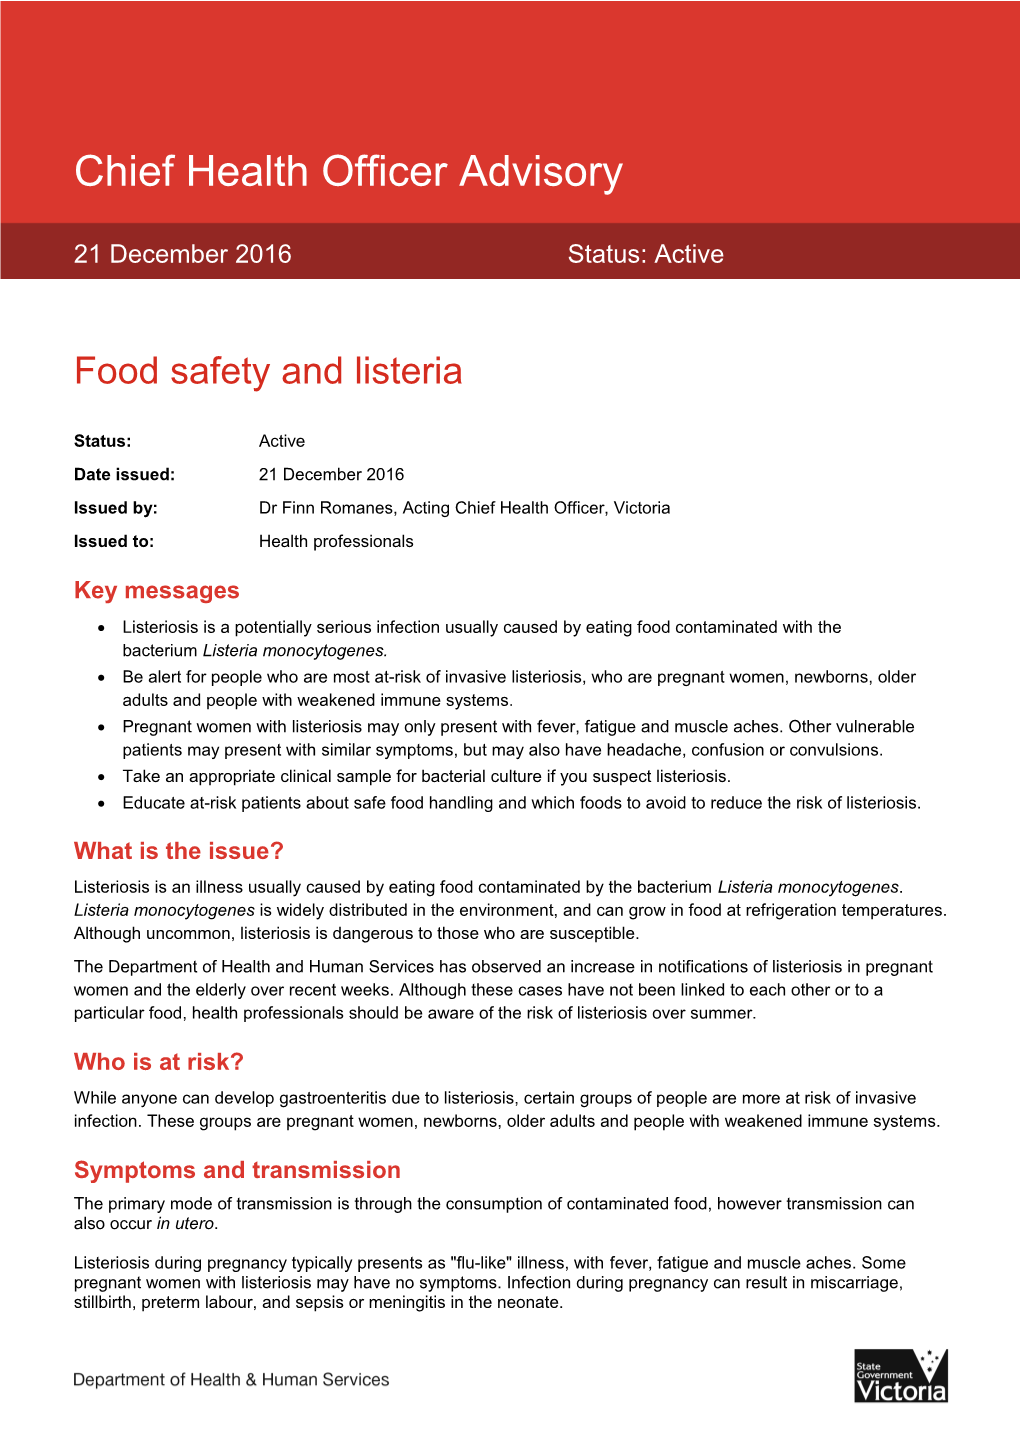 Food Safety and Listeria